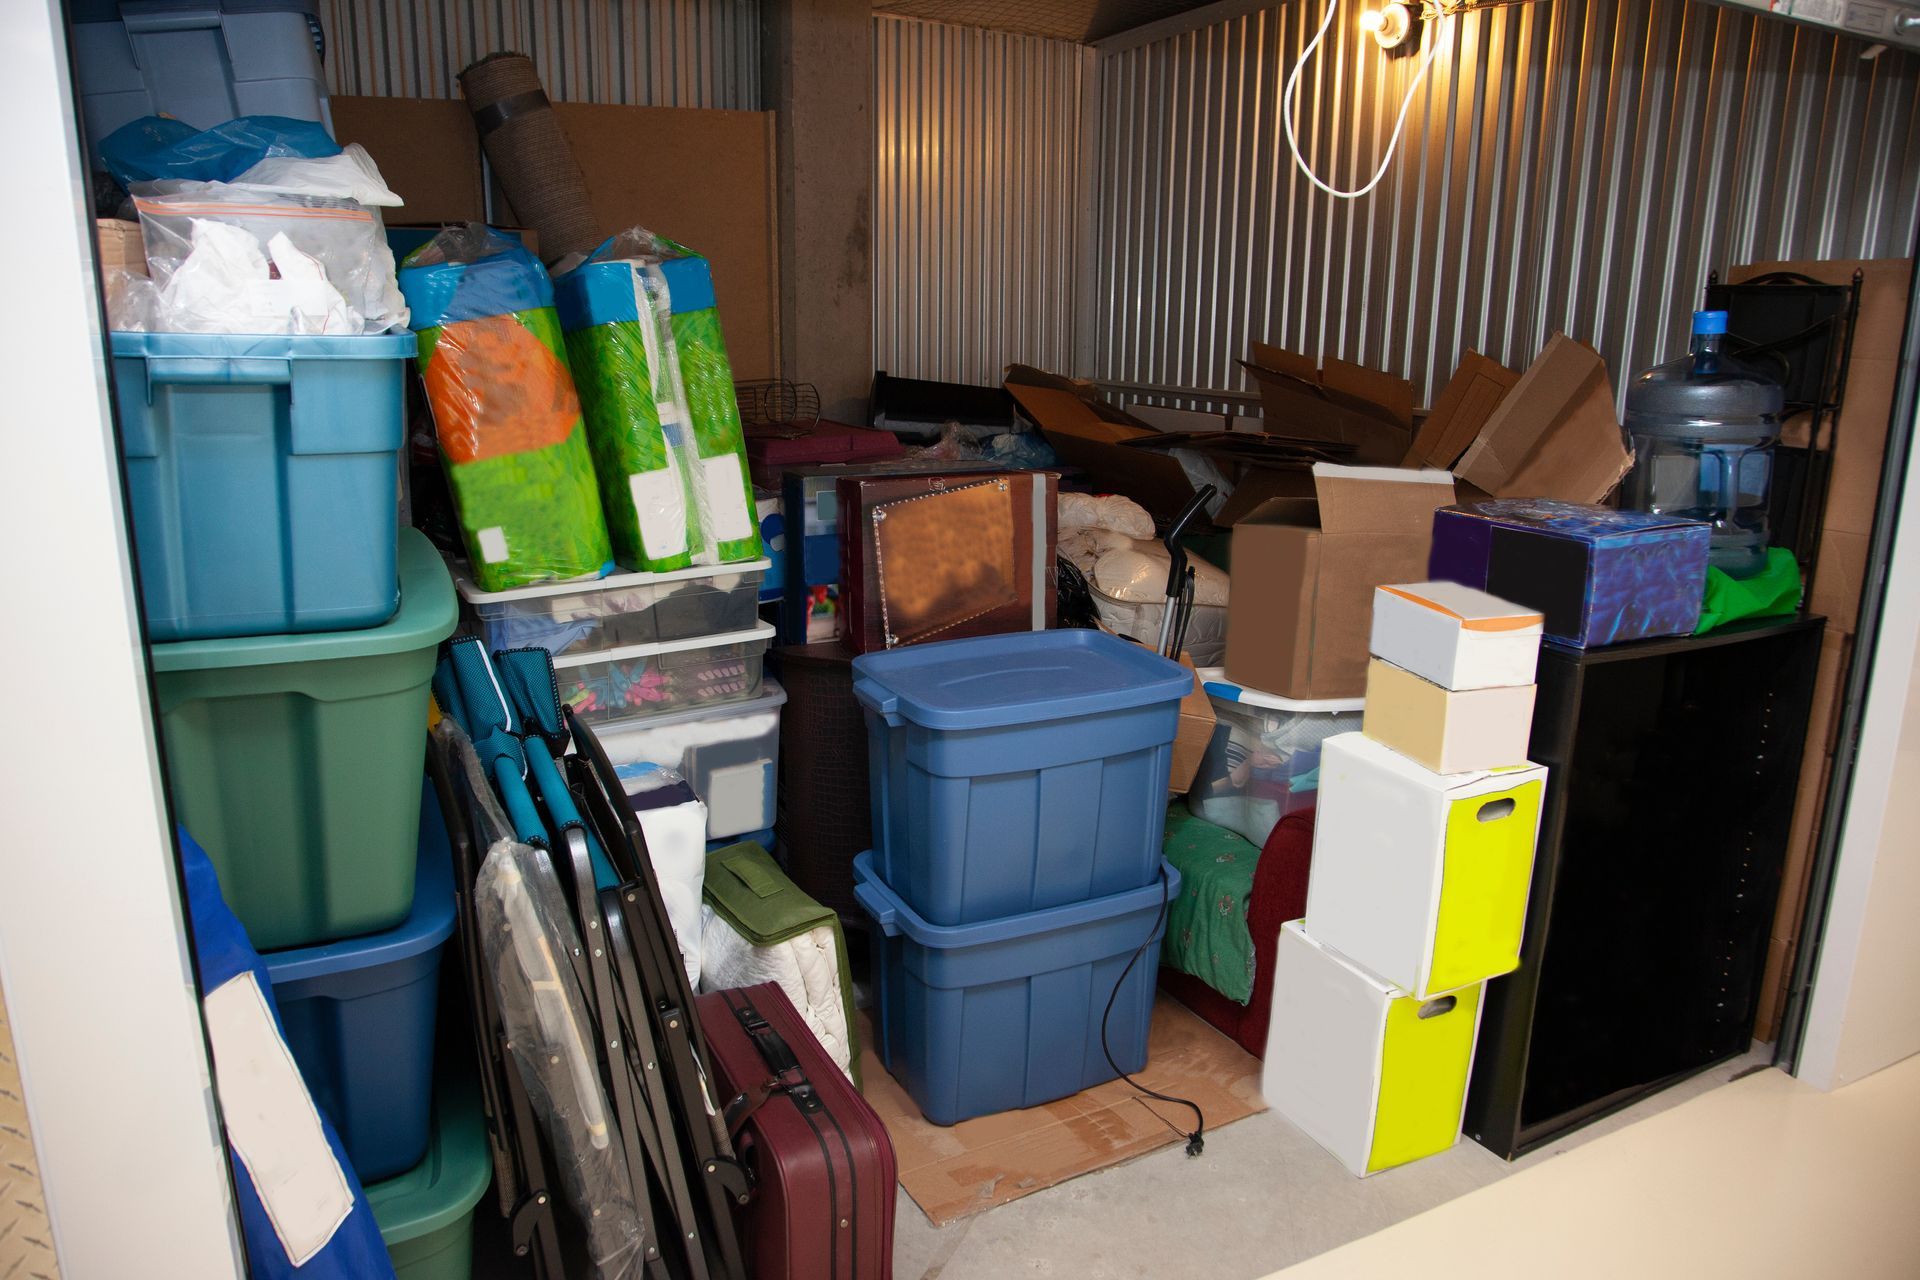 Household items you can put in a storage facility